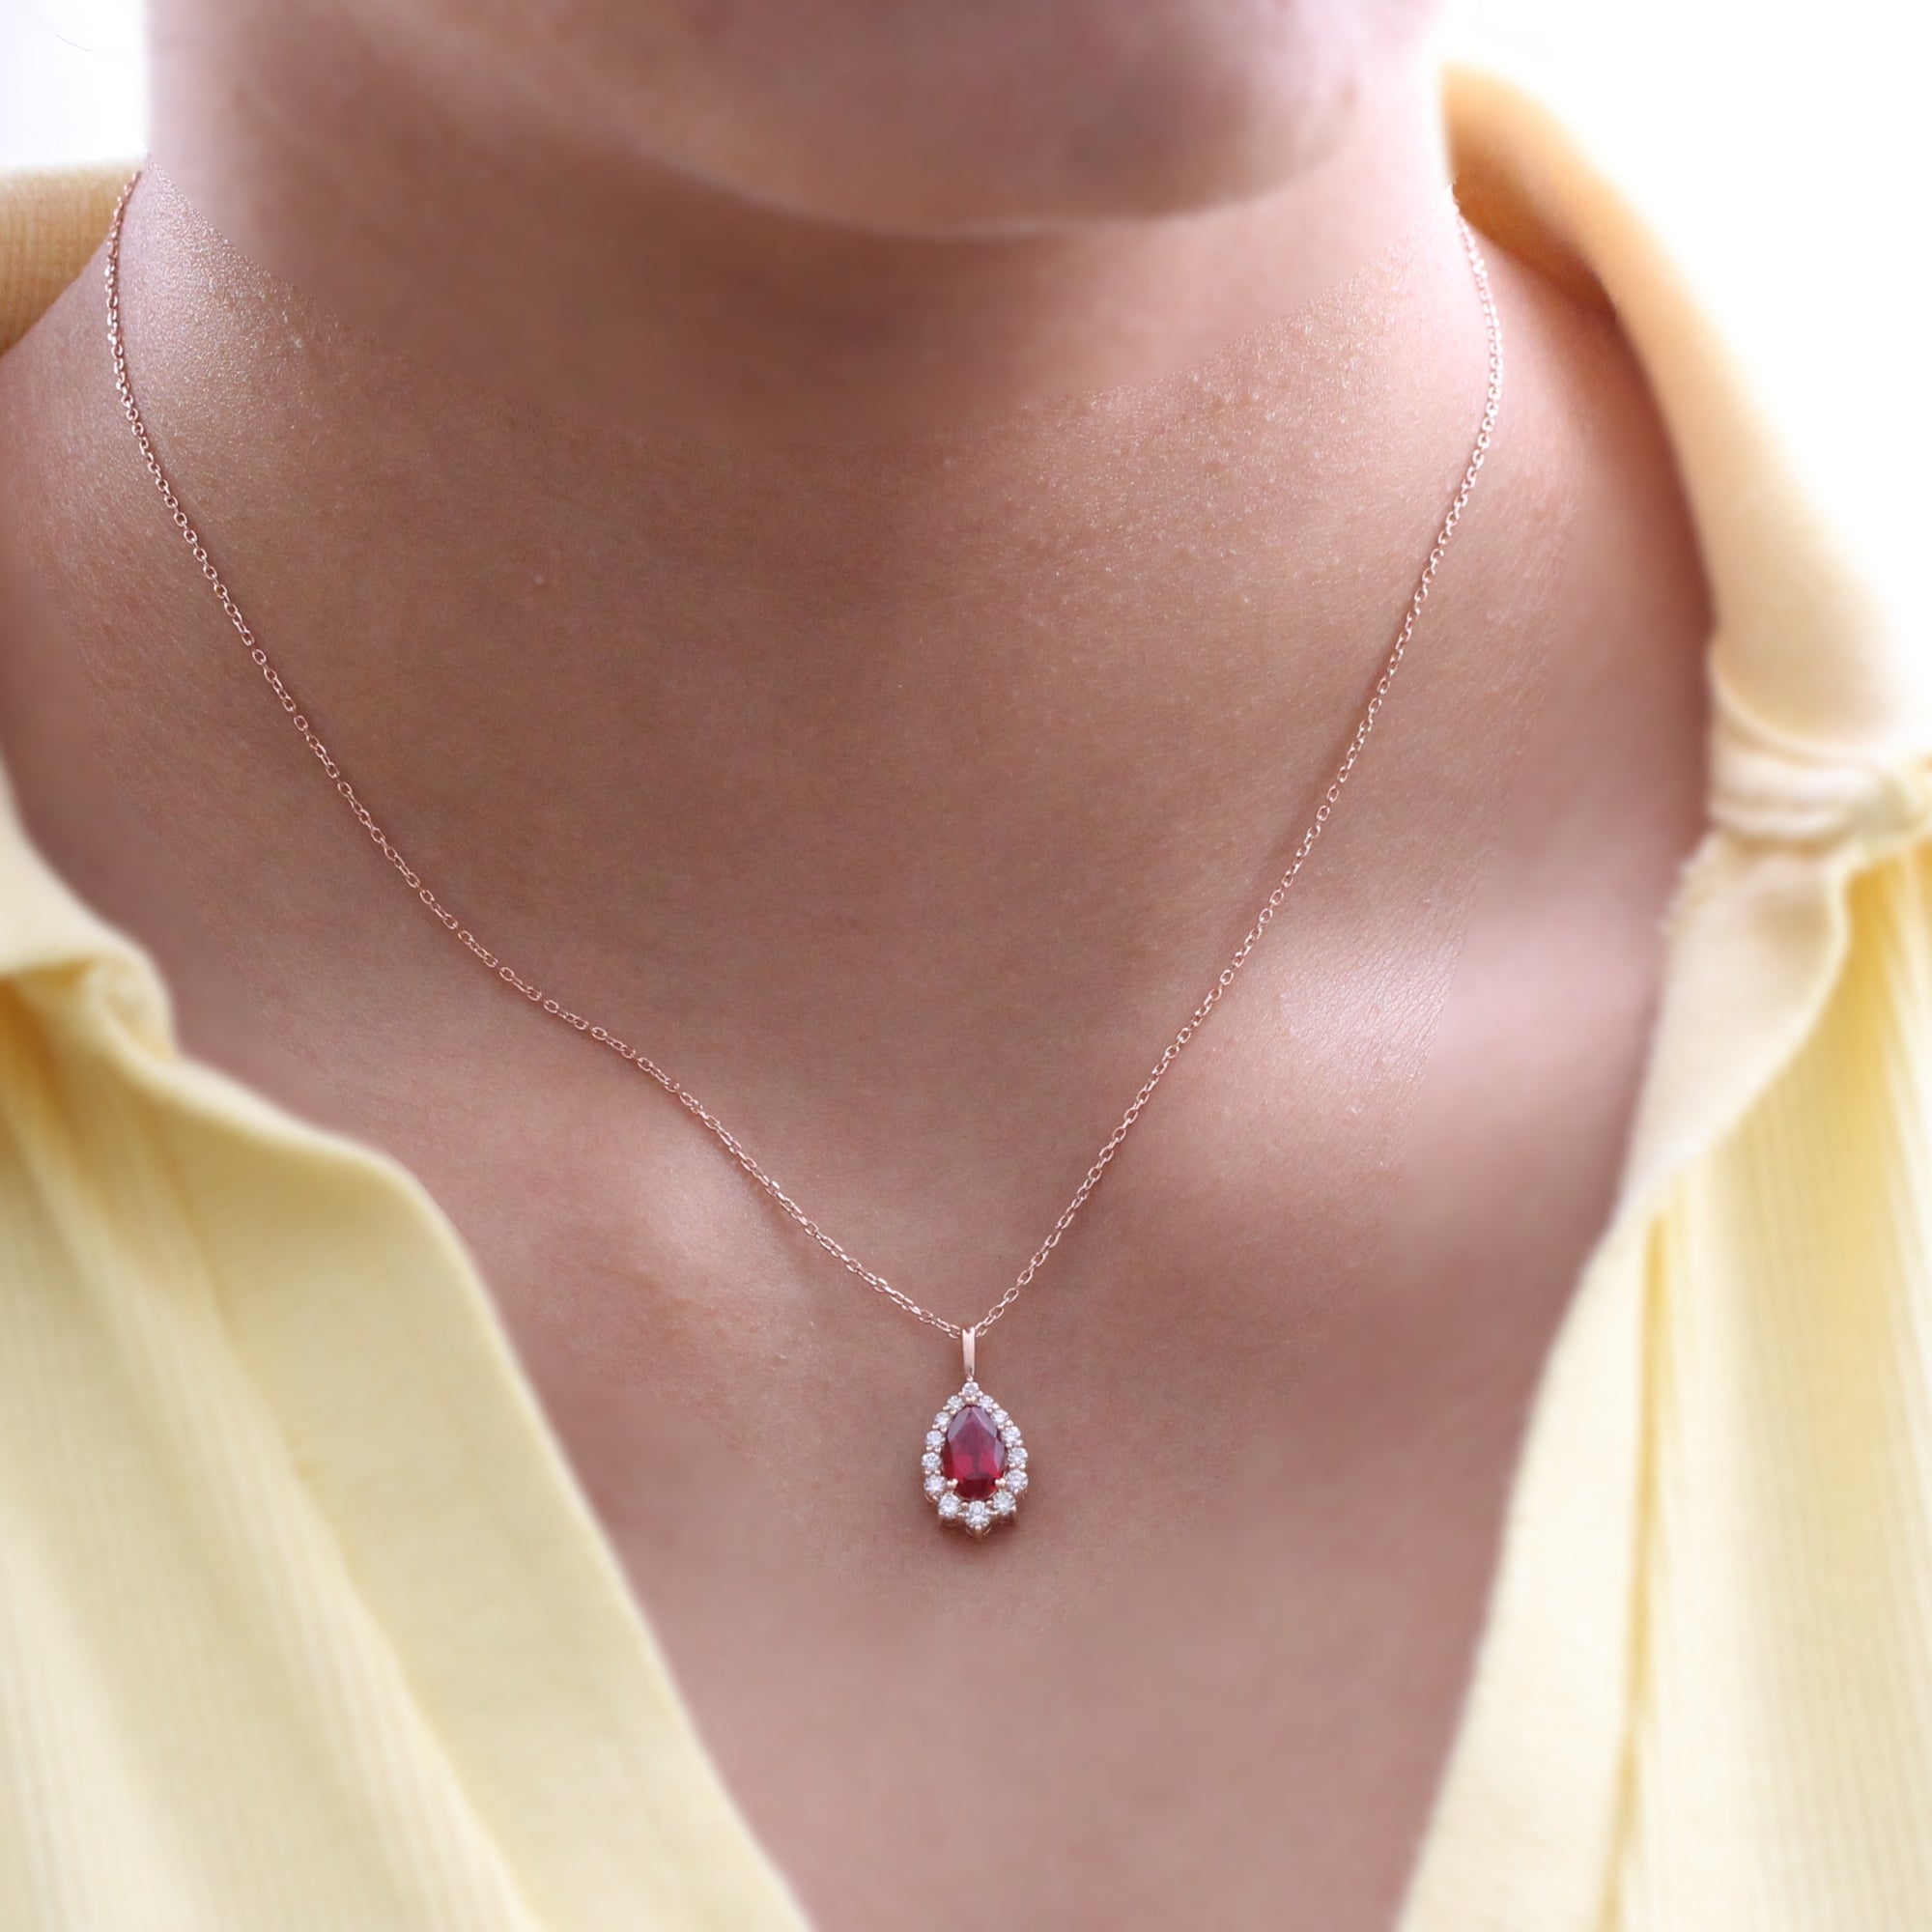 Pear Cut Ruby Stone Necklace